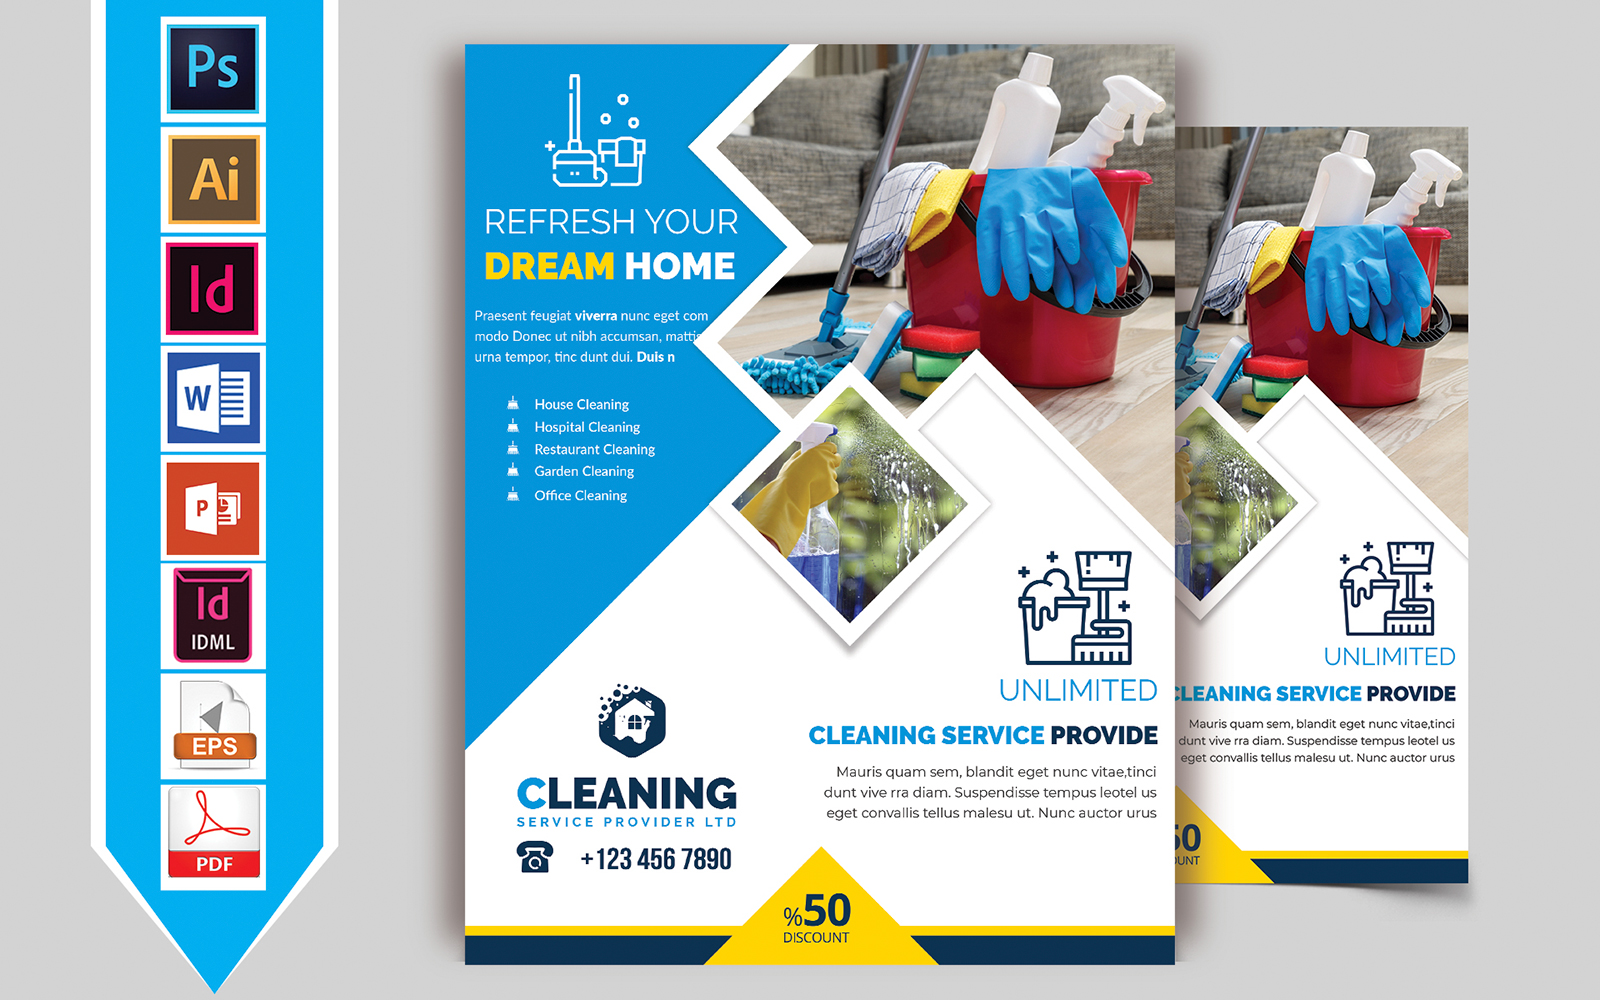 Cleaning Service Flyer Vol-06 - Corporate Identity Template